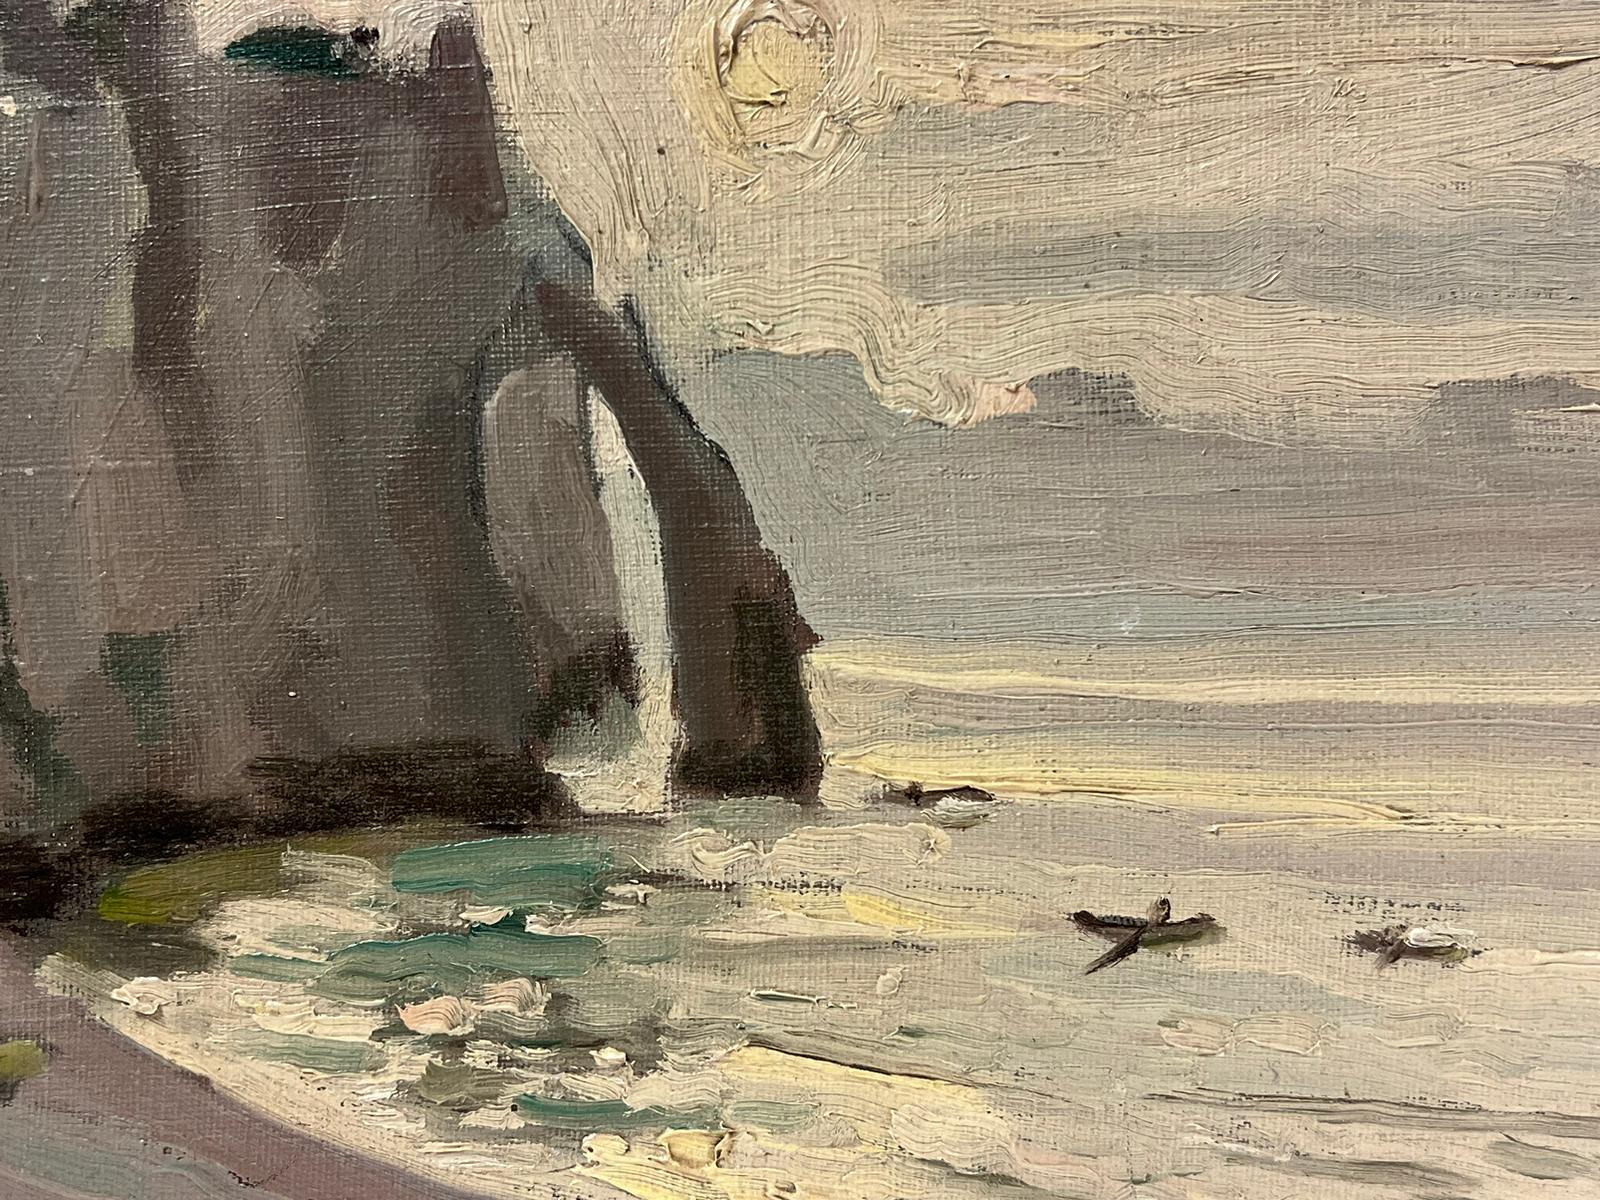 Etretat
by Georges Bordonave (French contemporary)
signed oil painting on canvas, unframed
dated 1970
canvas: 9.5 x 13 inches
condition: very good
provenance: from a large private collection of this artists work, western Paris, France. 